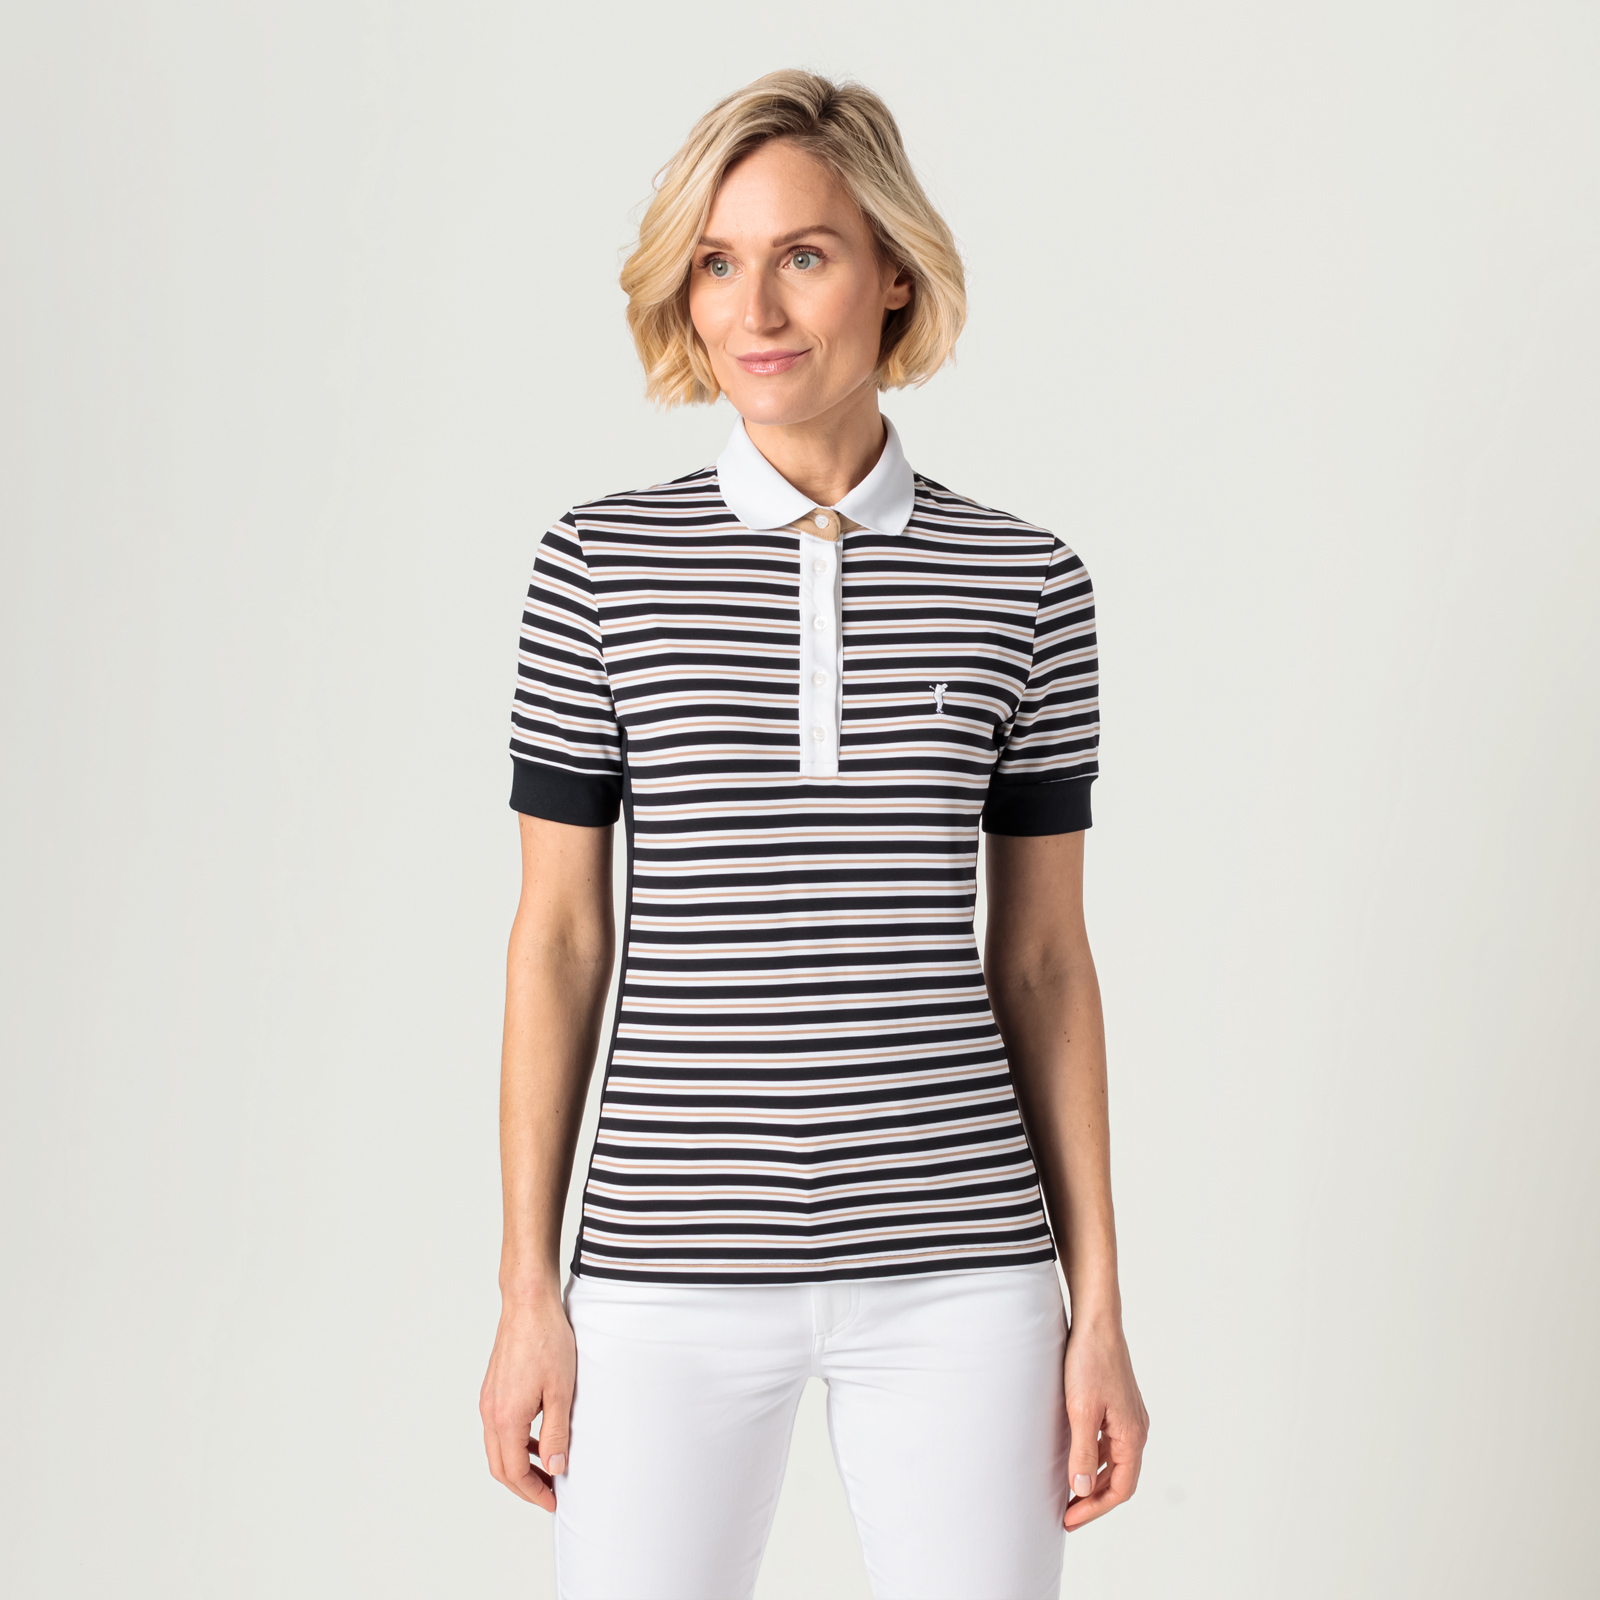 Ladies' golf polo shirt with all-over stripe pattern and moisture management function 